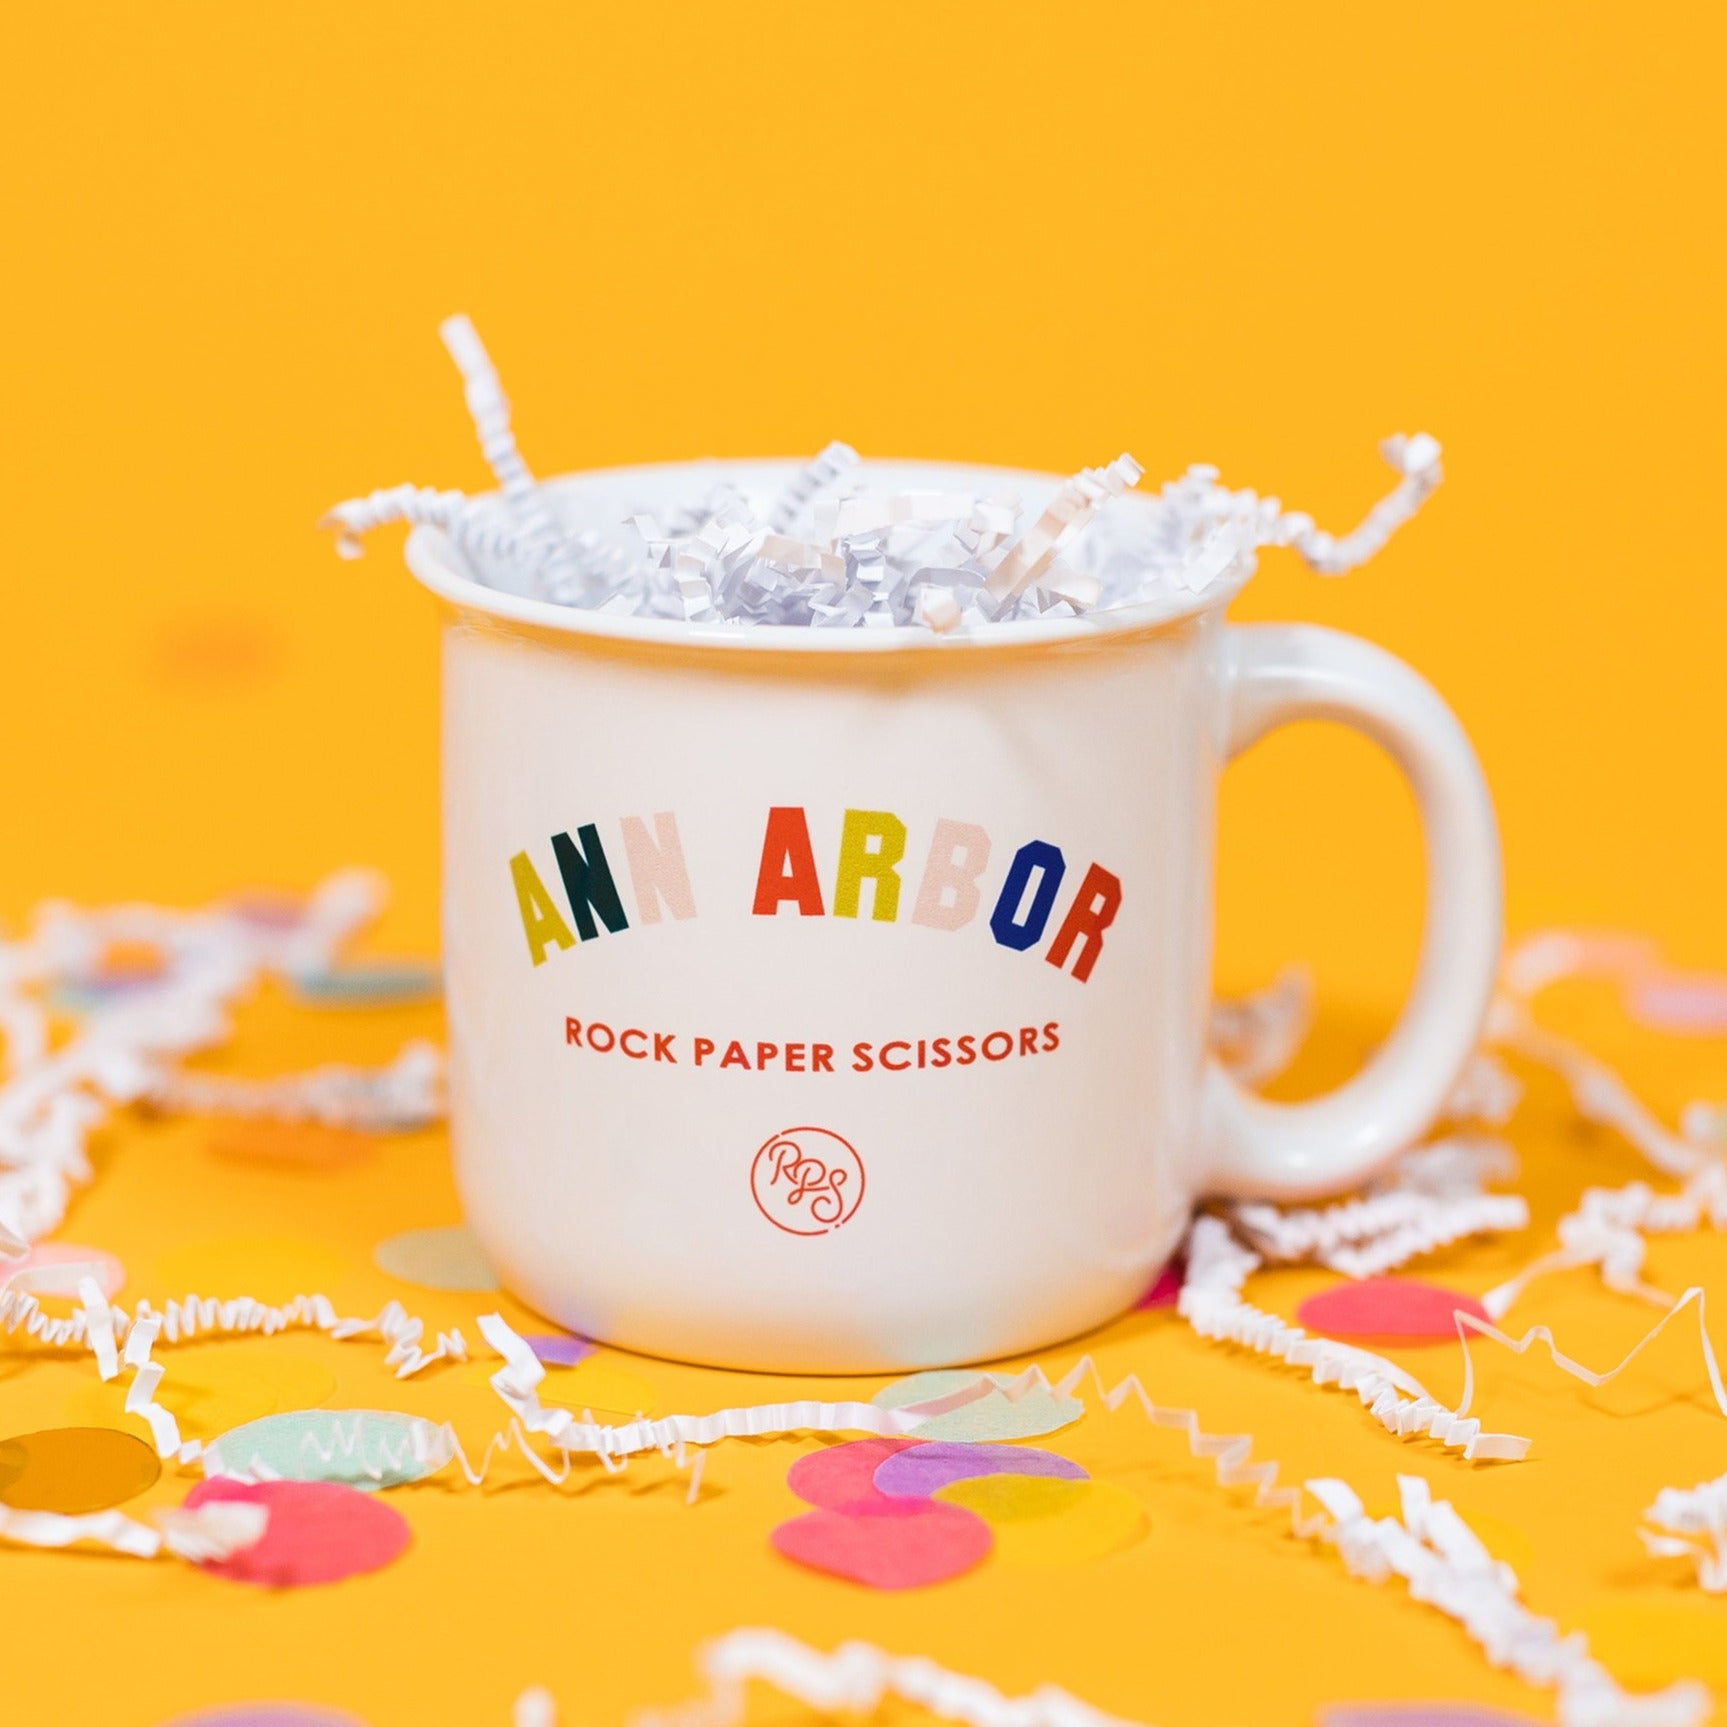 On a sunny mustard background sits a mug with white crinkle and big, colorful confetti scattered around. The white mug has a color collegiate font that says "ANN ARBOR" and under it says "ROCK PAPER SCISSORS" in a red, all caps block font. Under that is a circular, red "RPS" logo in handwritten script lettering.